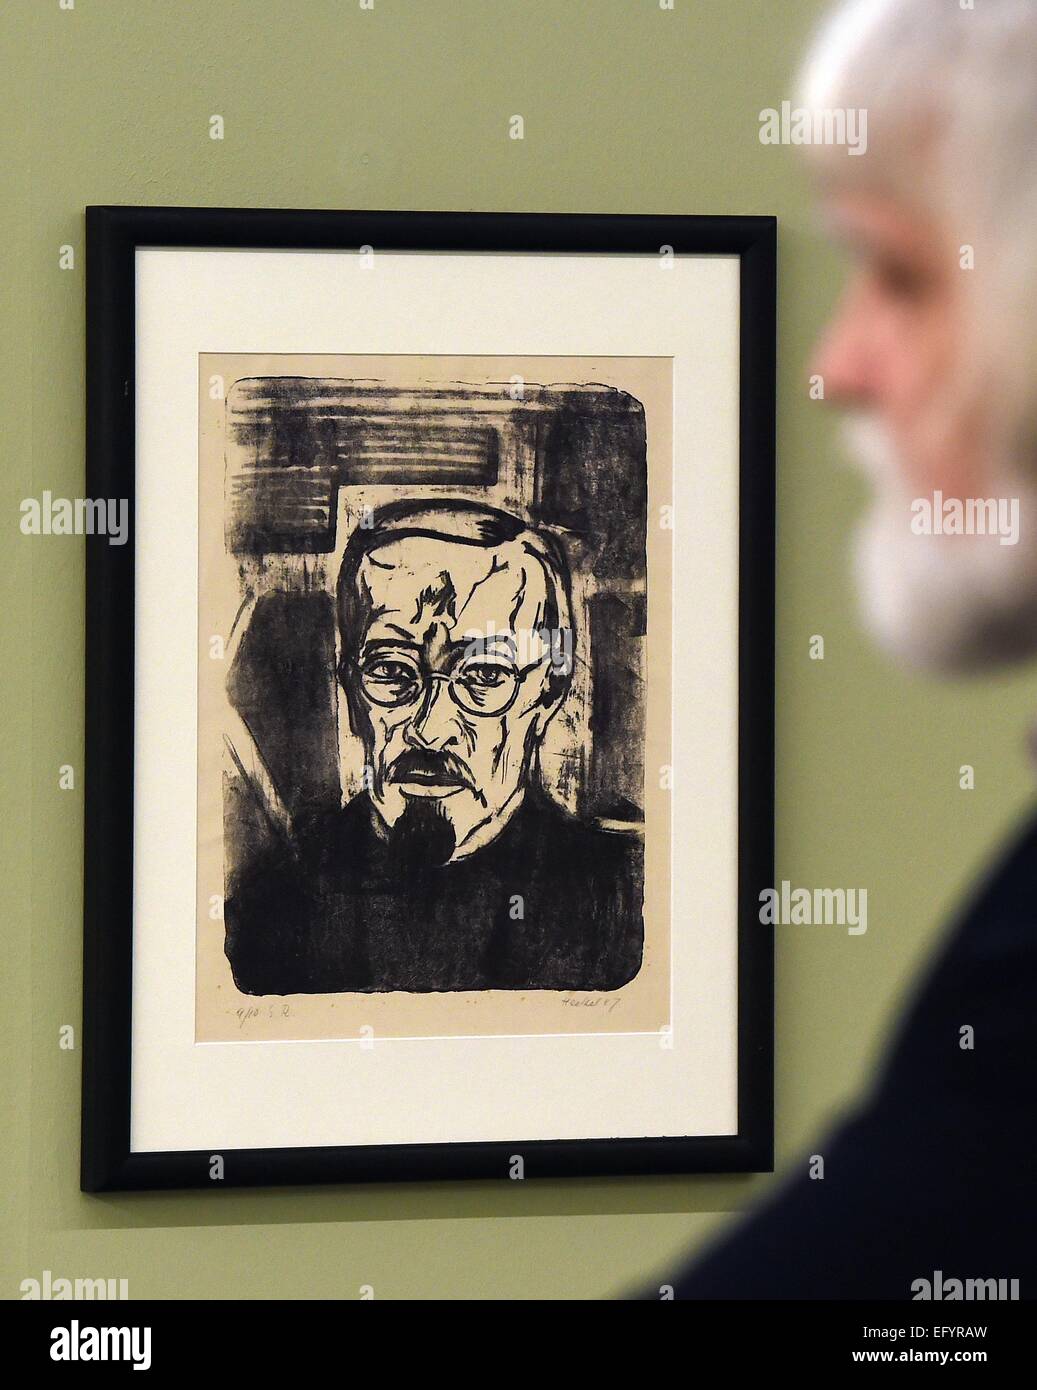 A visitor examines a self-portrait painting by artist Karl Schmidt-Rottluff during a preview tour of the Moritzburg art museum in Halle, Germany, 12 February 2015. The exhibition showcases 70 works of art of various artists of the artist group 'The Bridge'. Photo: Hendrik Schmidt/ZB Stock Photo